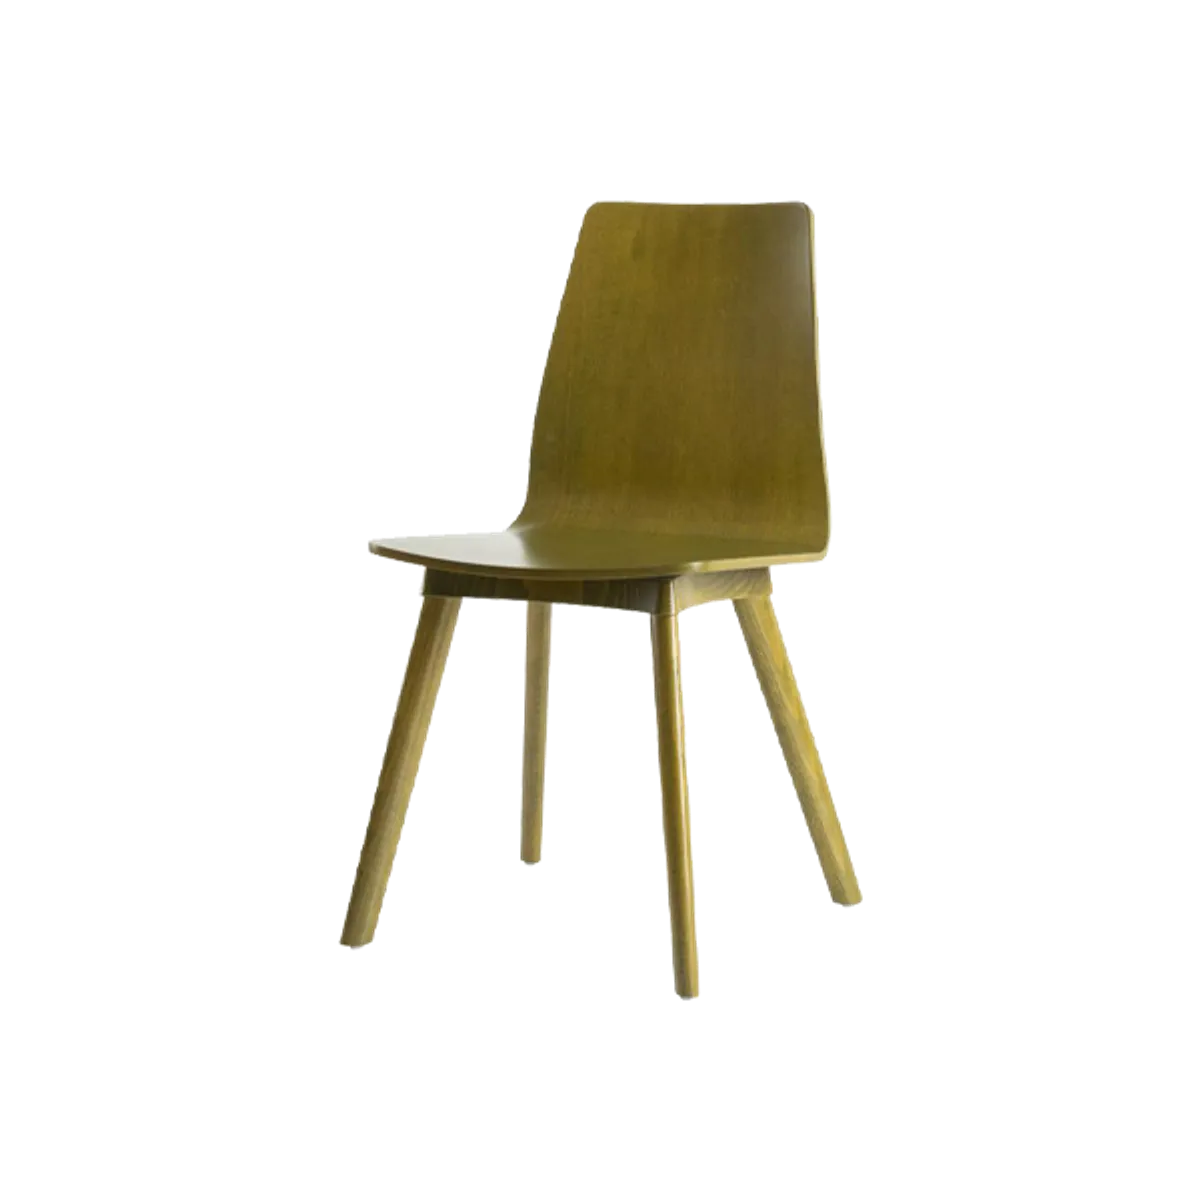 Allendale wood side chair Inside Out Contracts